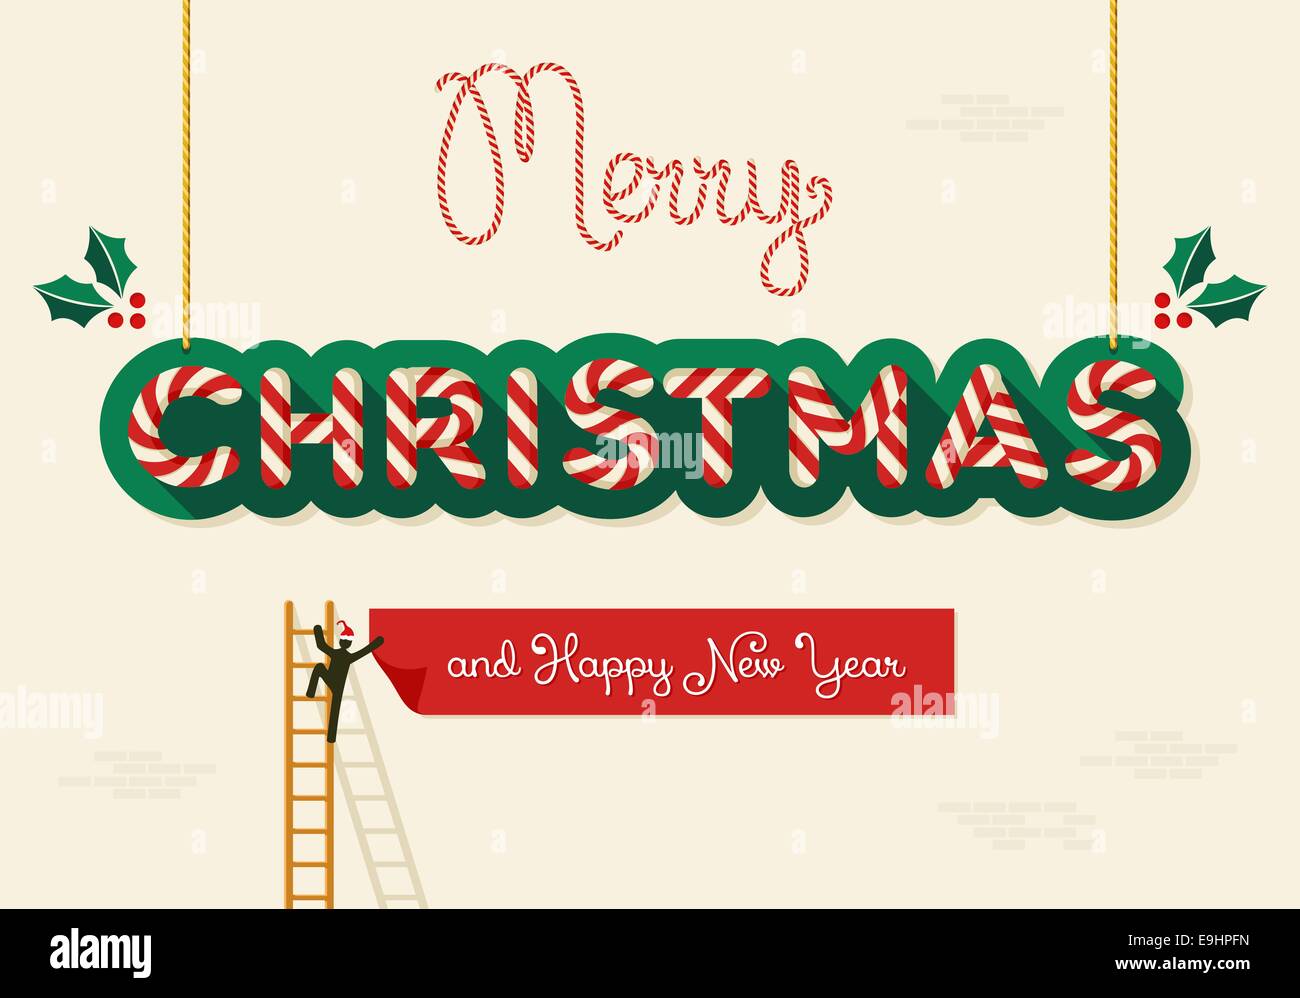 Xmas character works on Merry Christmas and Happy New Year billboards. EPS10 vector illustration organized in layers for easy ed Stock Photo